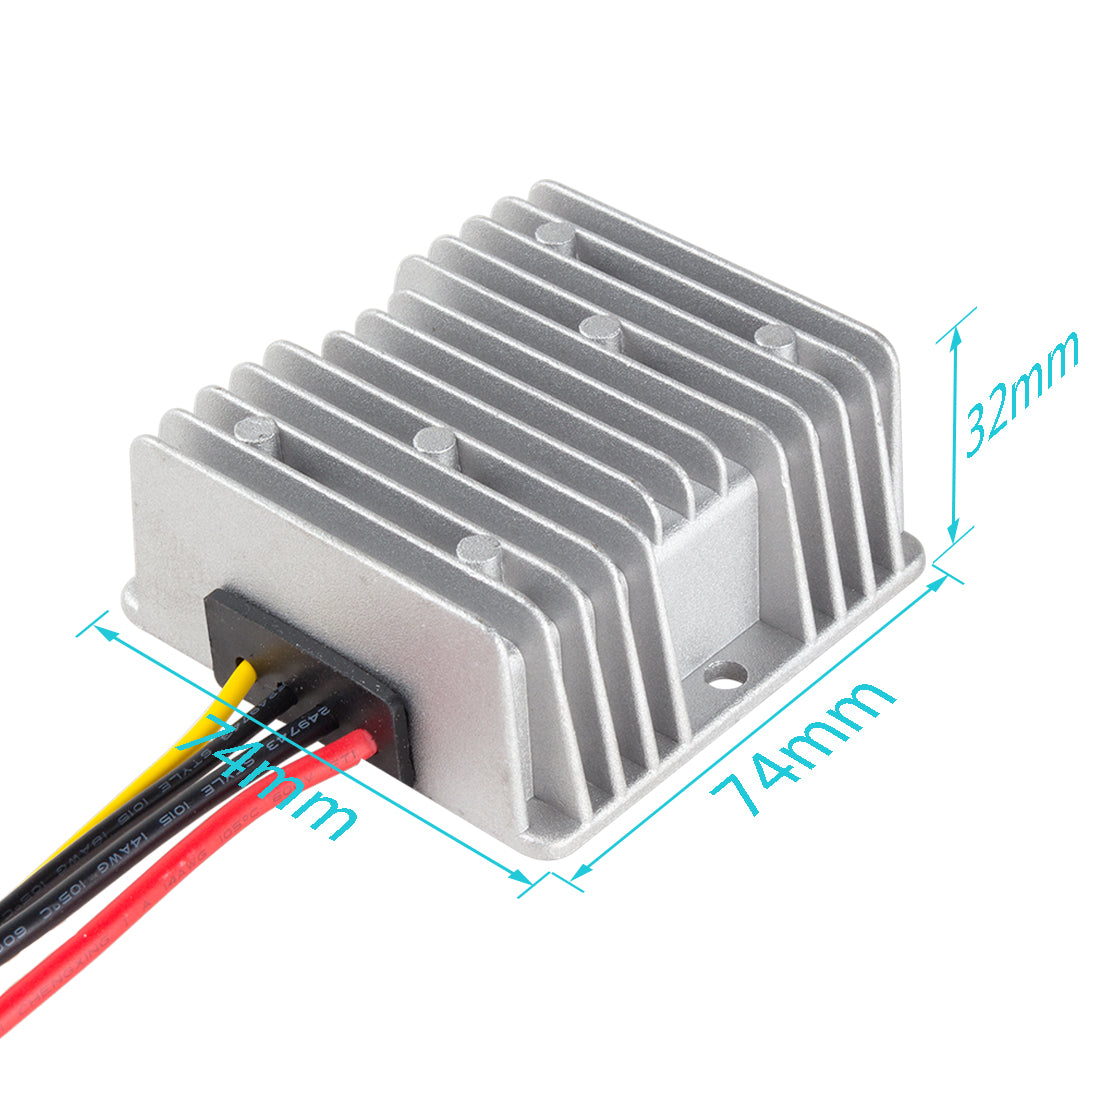 uxcell uxcell Voltage Converter Regulator DC/DC DC 12V Step-Up to DC 48V 3A 144W Power Boost Transformer Waterproof